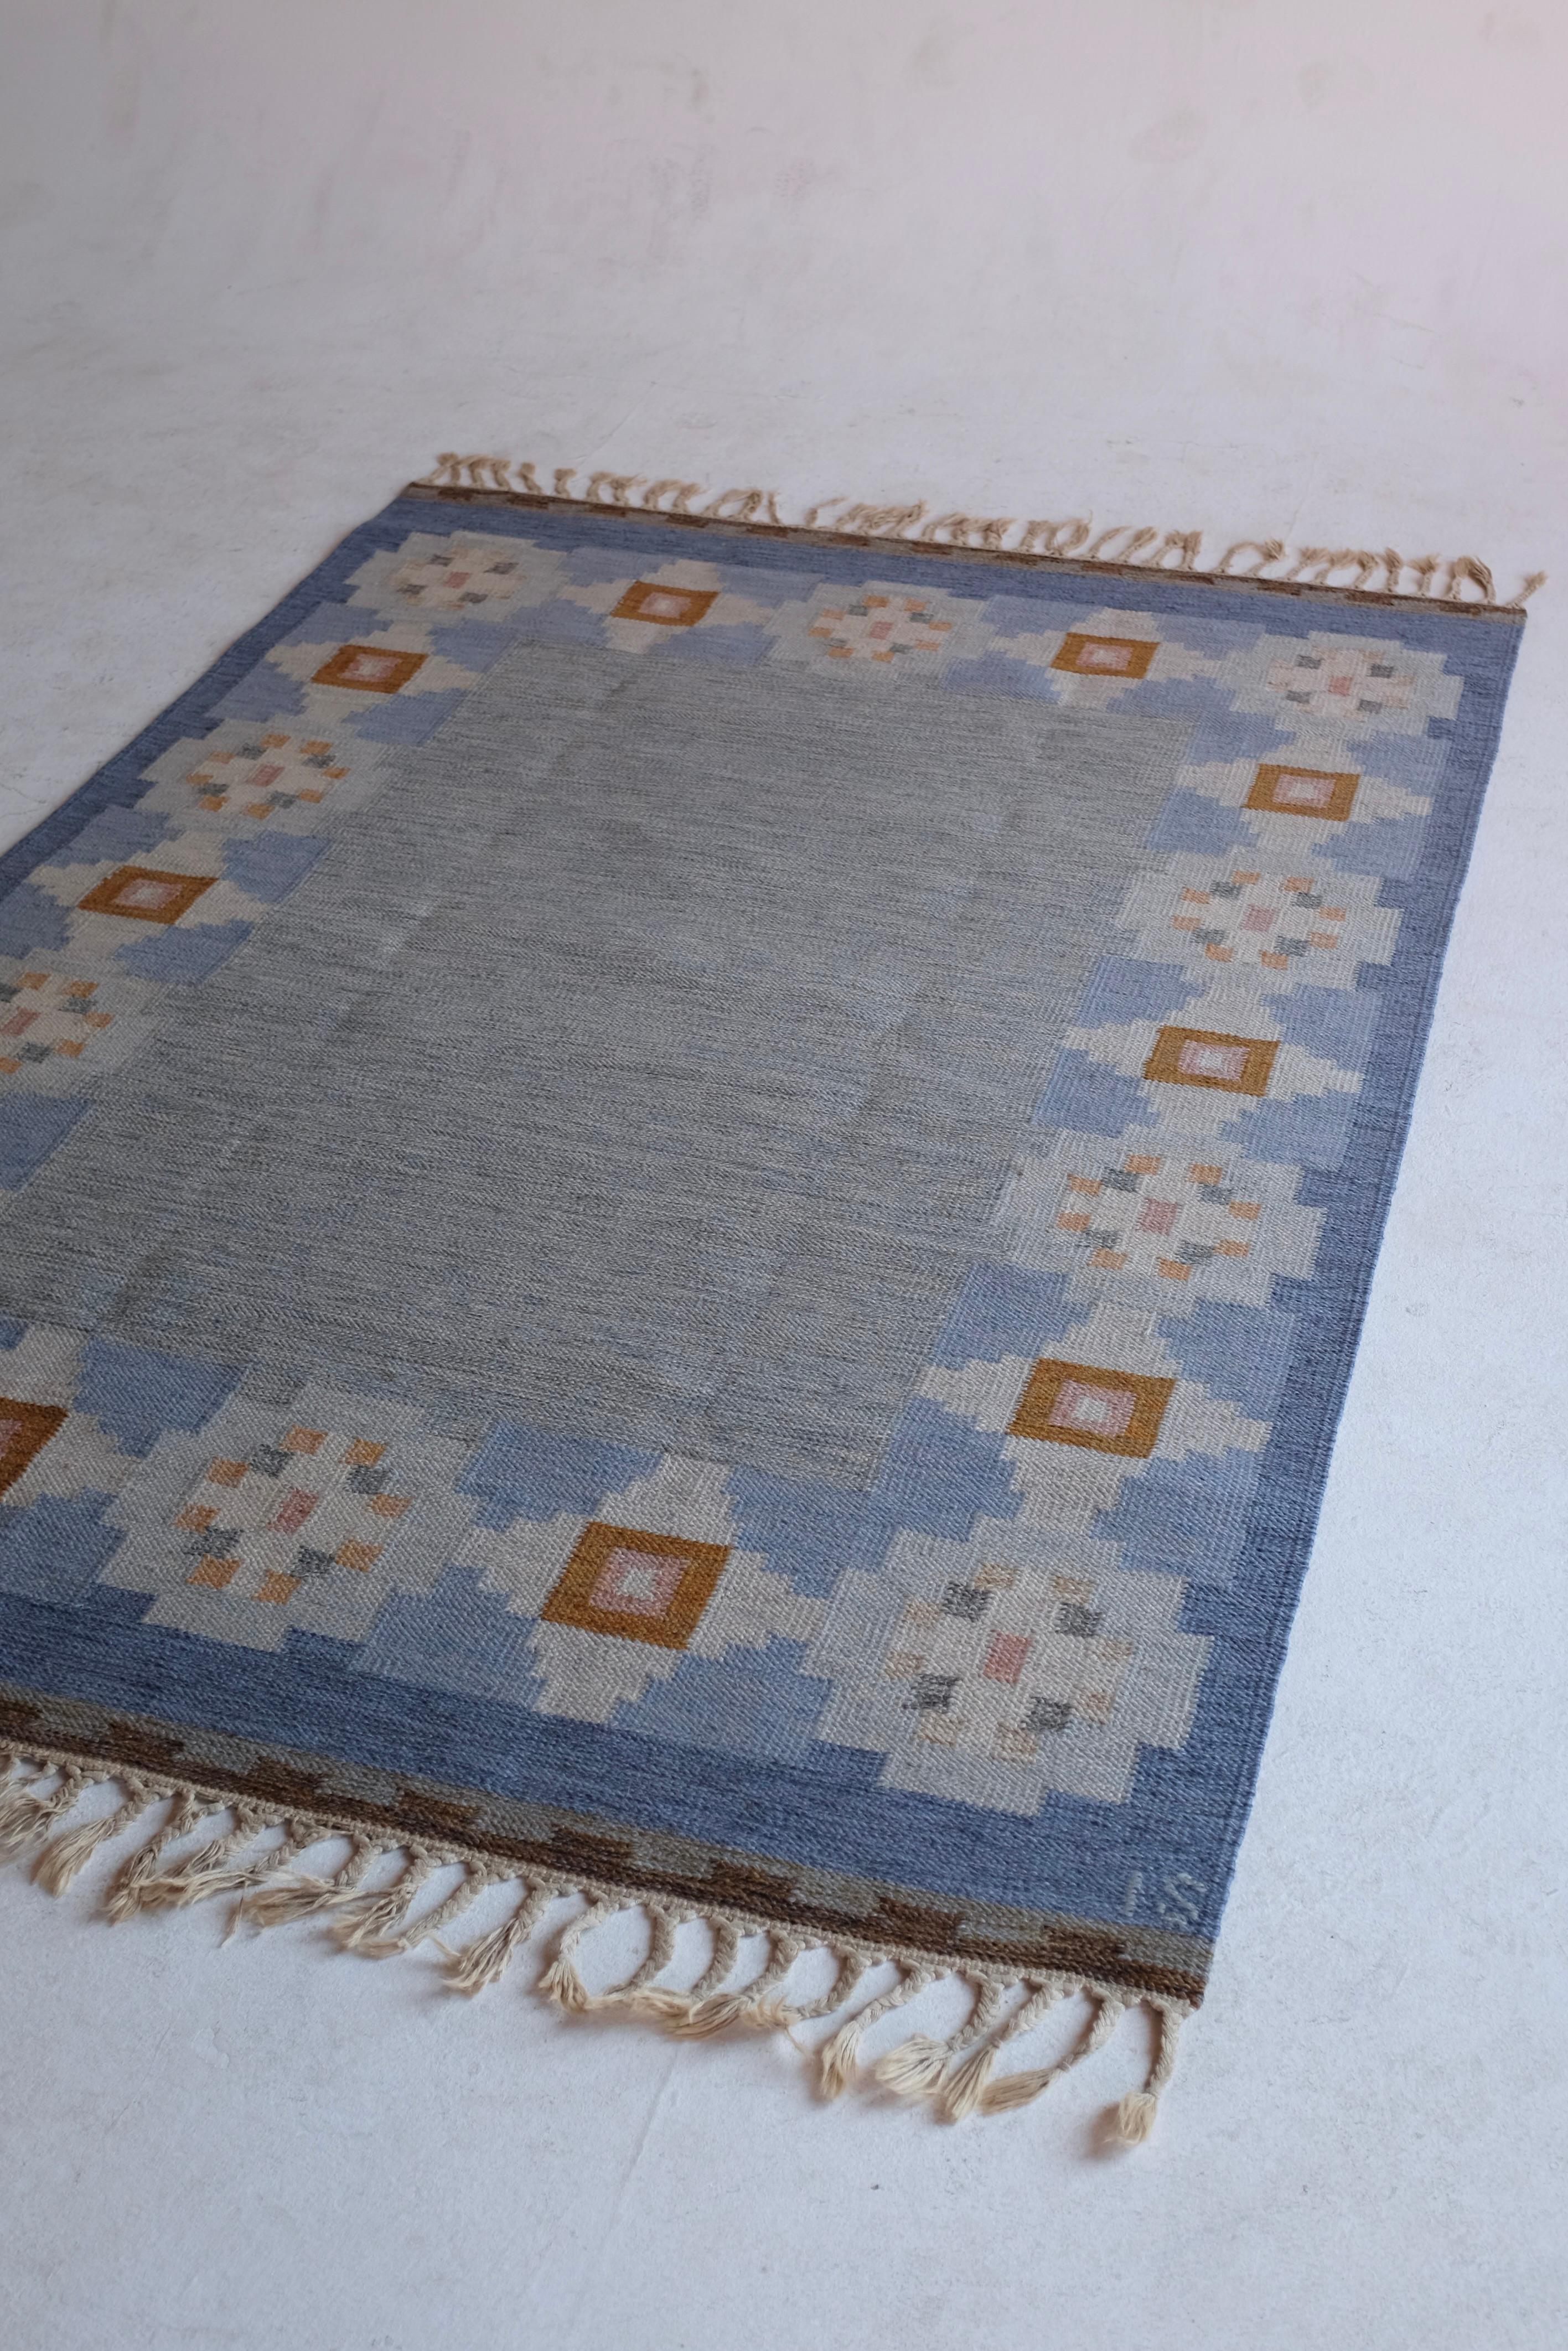 Vintage Mid-Century rug by Swedish textile designer Ingegerd Silow. A blue foundation sits against a geometric flower design along the borders in brown, white and pink shades. In a good condition with some wear to the fringes and small marks on the